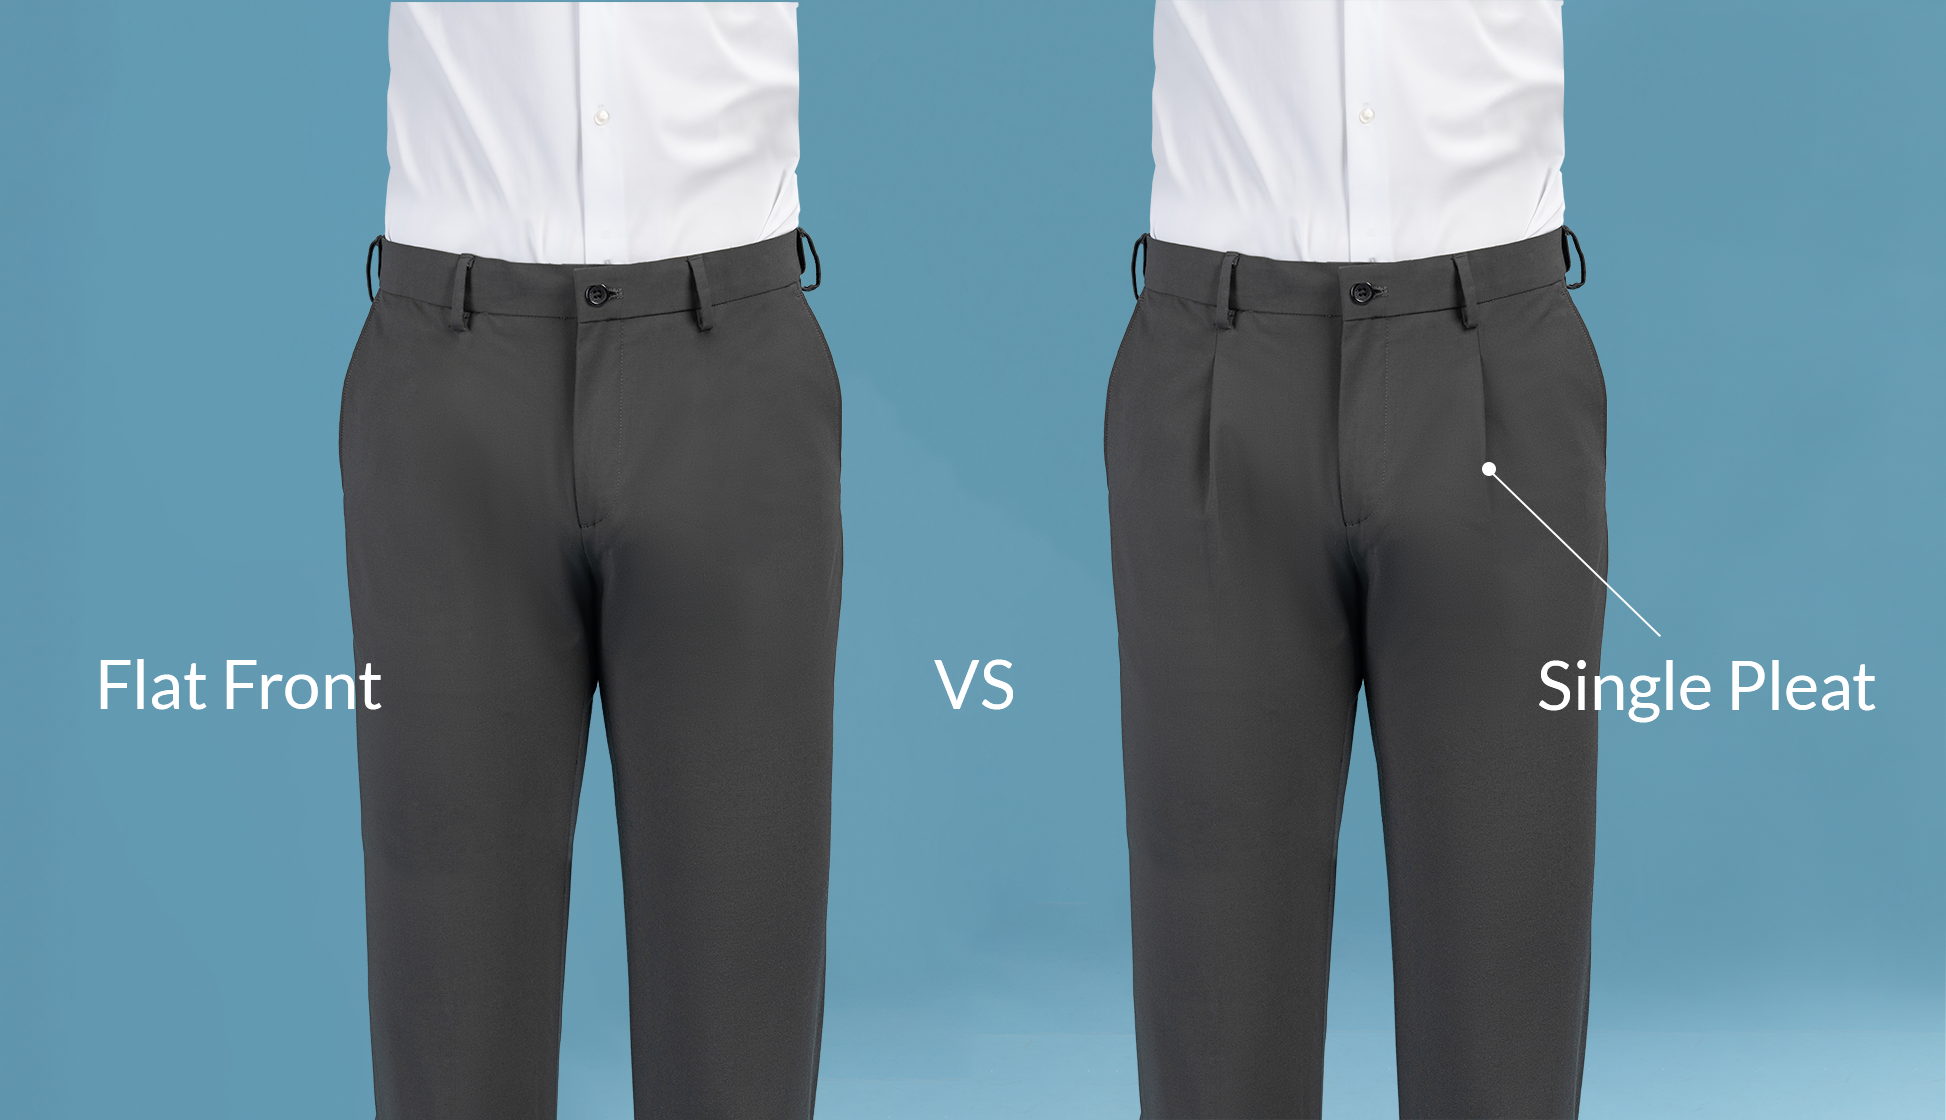 What Are Flat Front Pants?